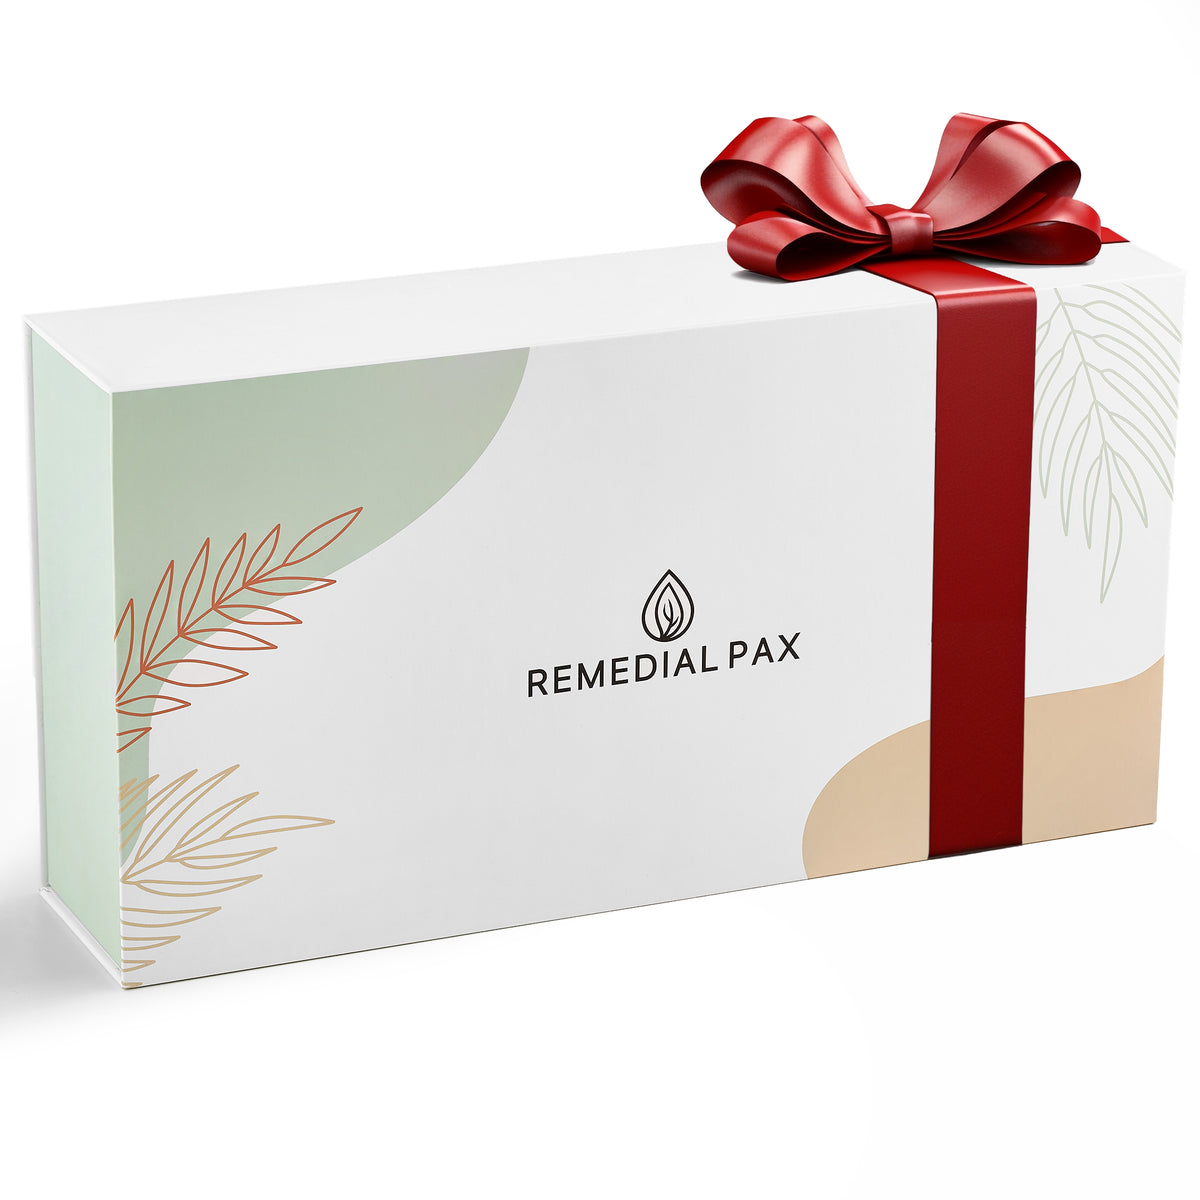 10-Product Collection by REMEDIAL PAX for Comprehensive Skin Wellness